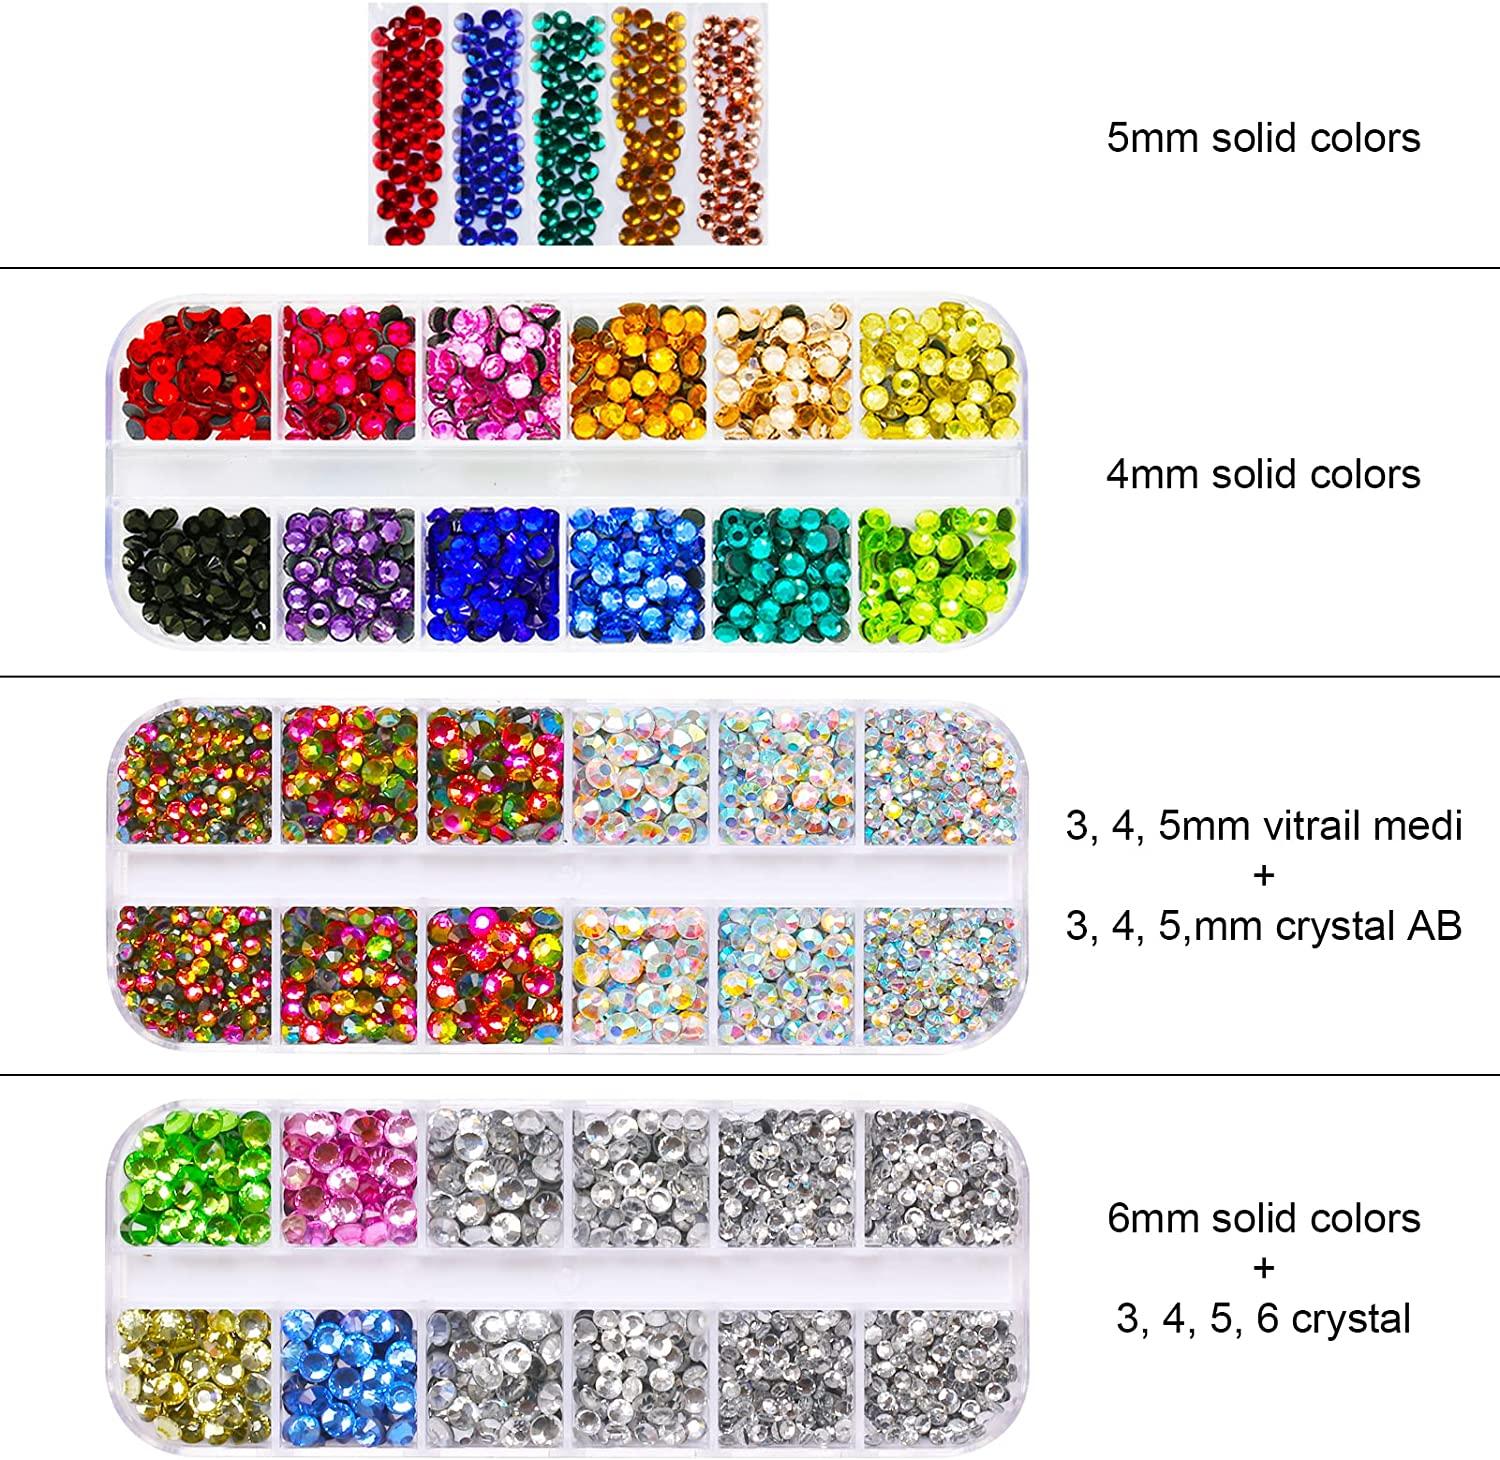 Hotfix Rhinestone Applicator, Bedazzler Kit with Rhinestones for Clothes  Crafts